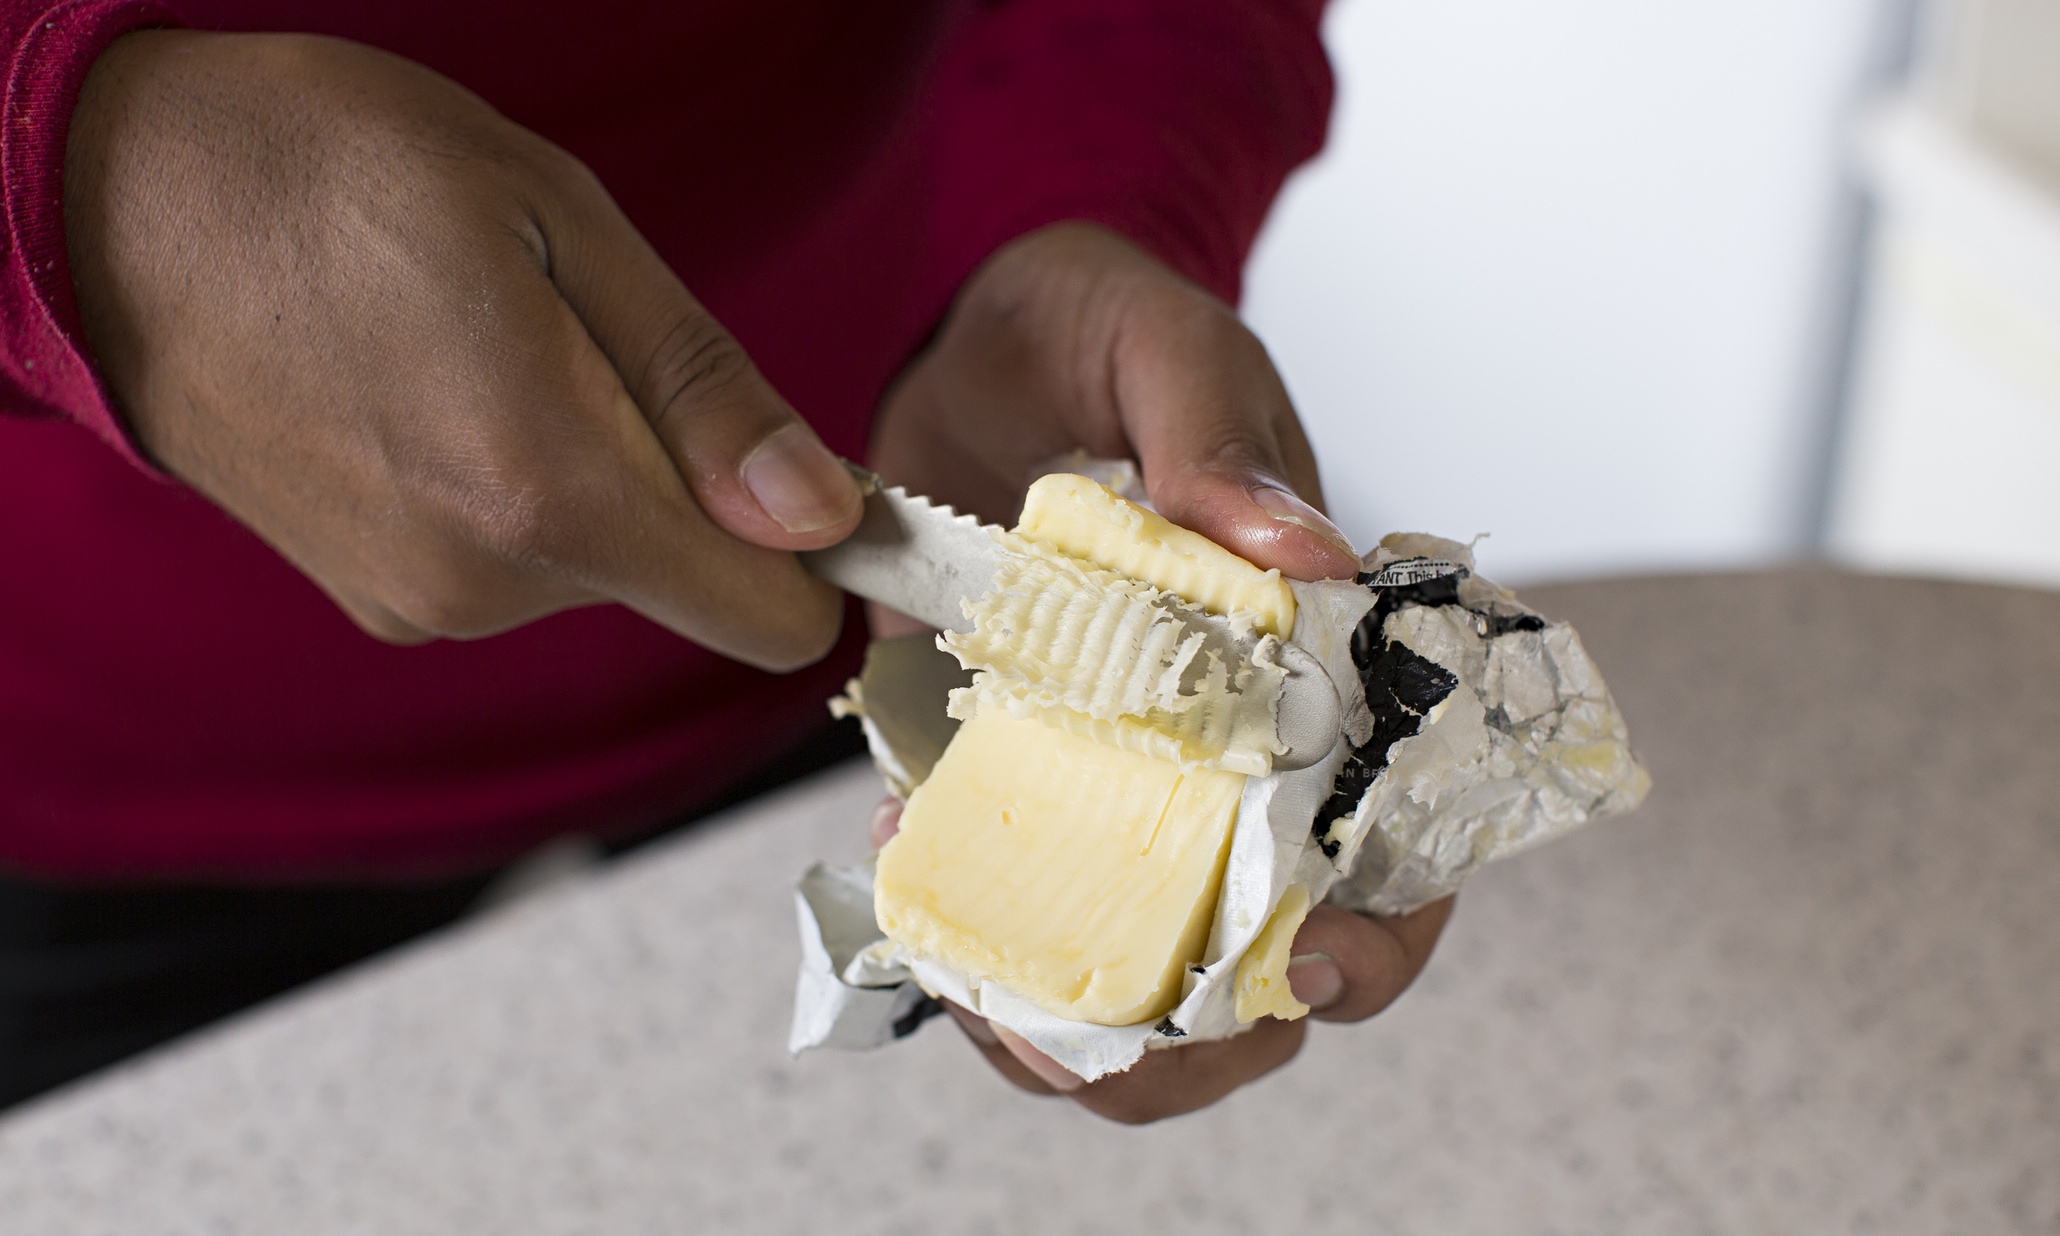 The self-heating butter knife produces a pleated roll of cream turning over itself